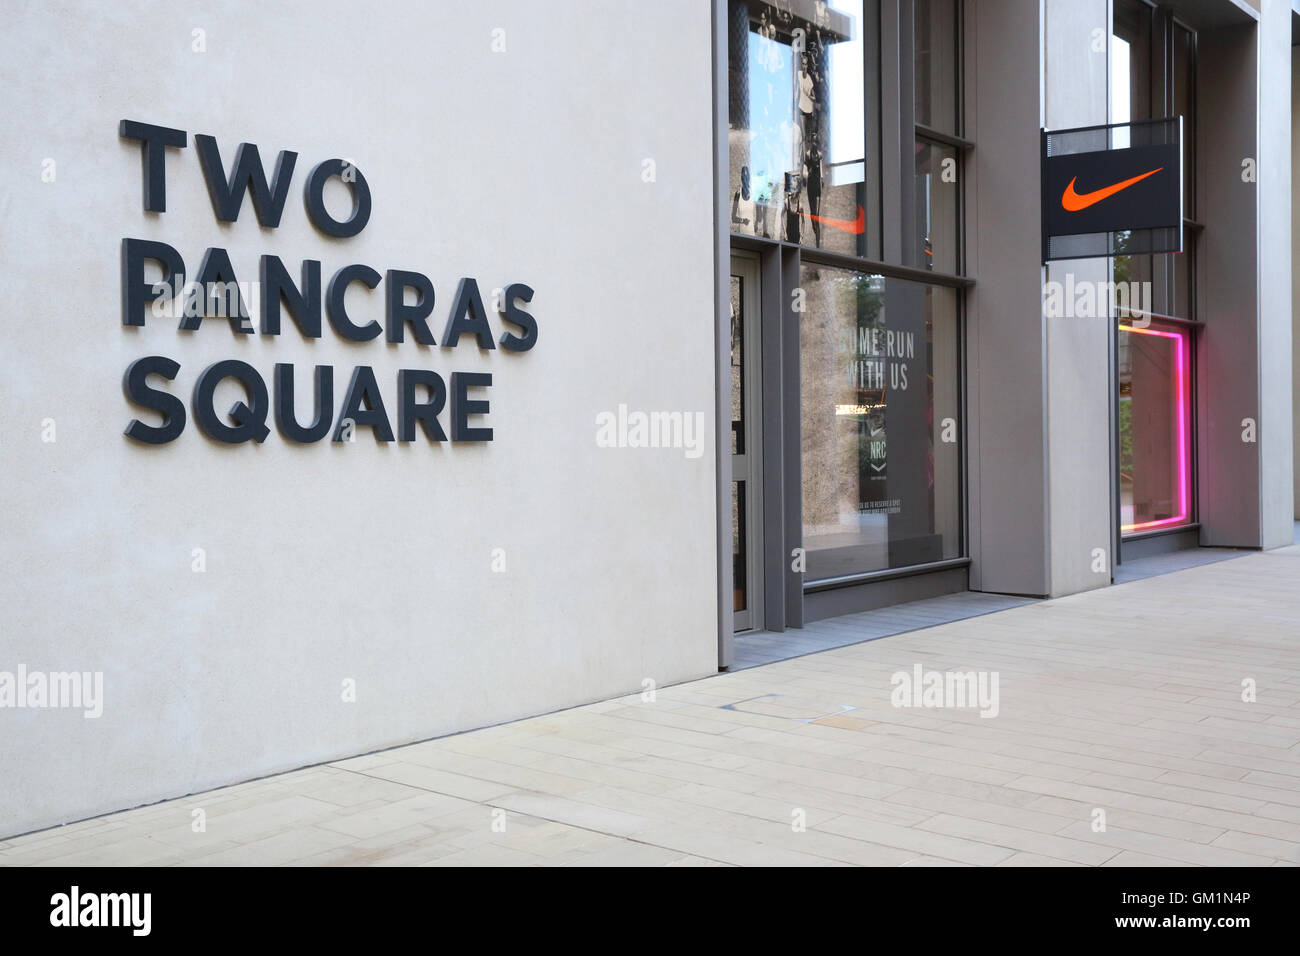 Nike sports superstore at 2 Pancras Square, at Kings Cross, north London, England, UK Photo Alamy